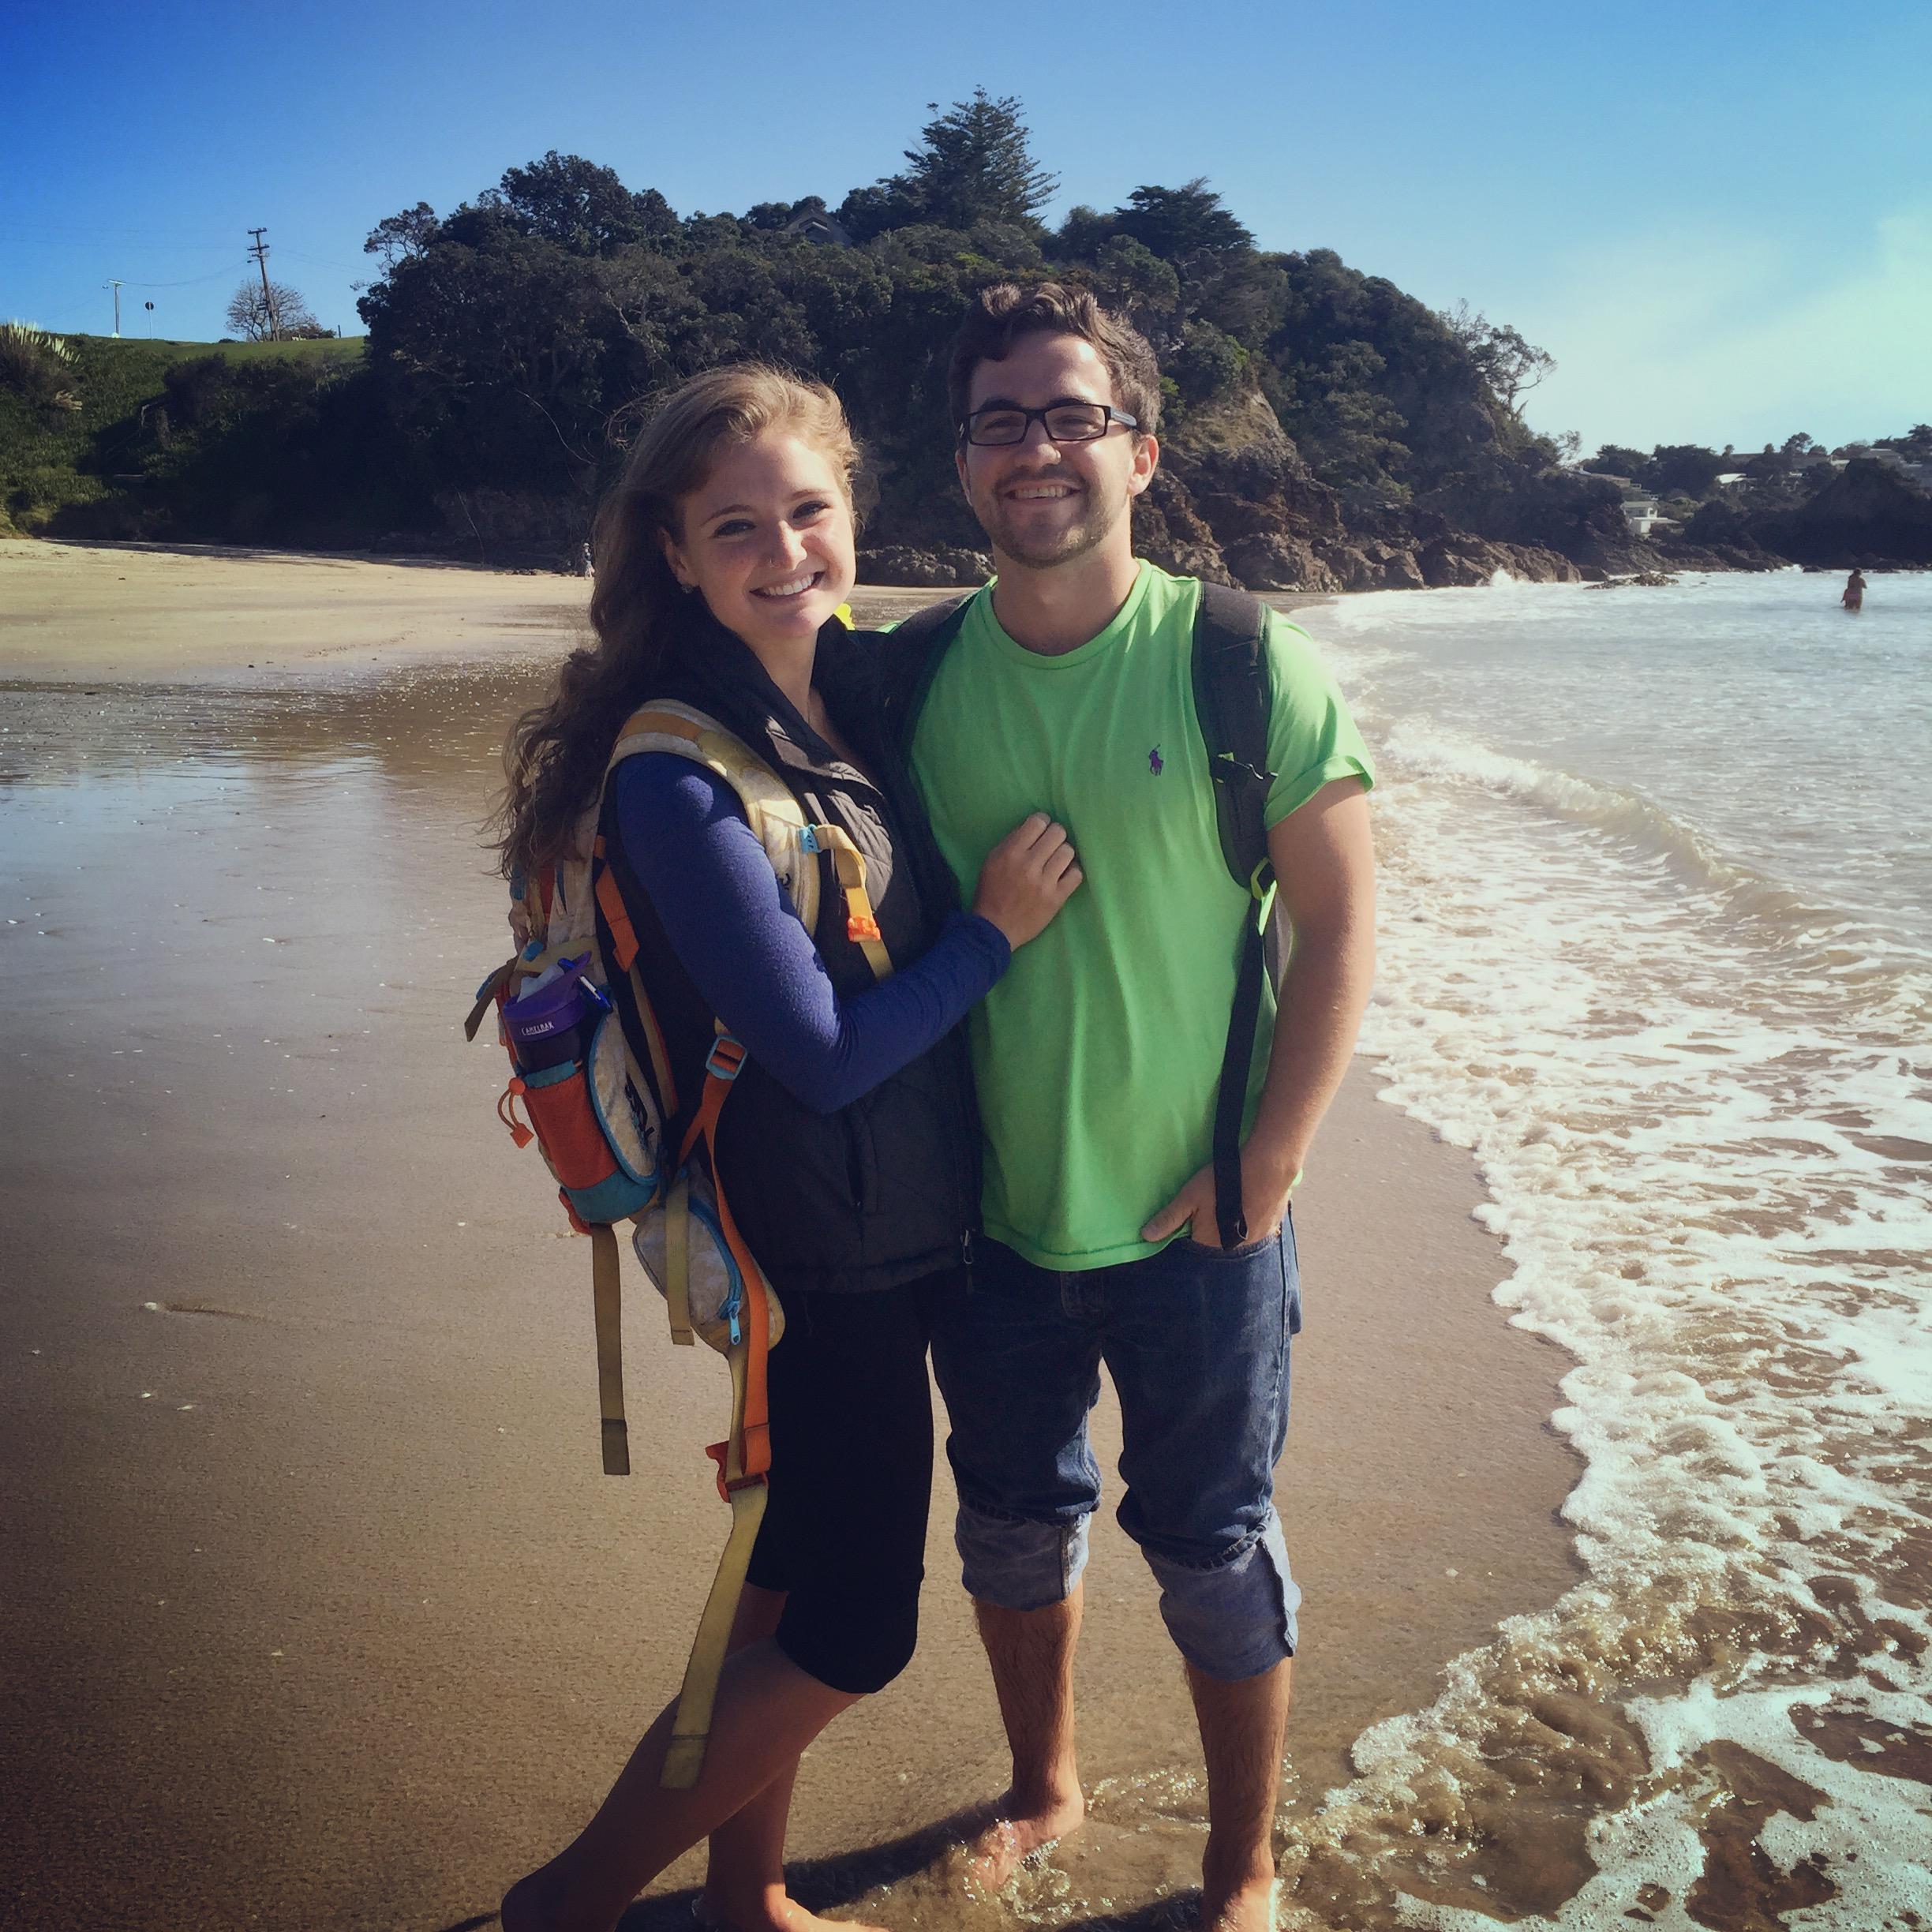 A day at the beach in New Zealand, 2015